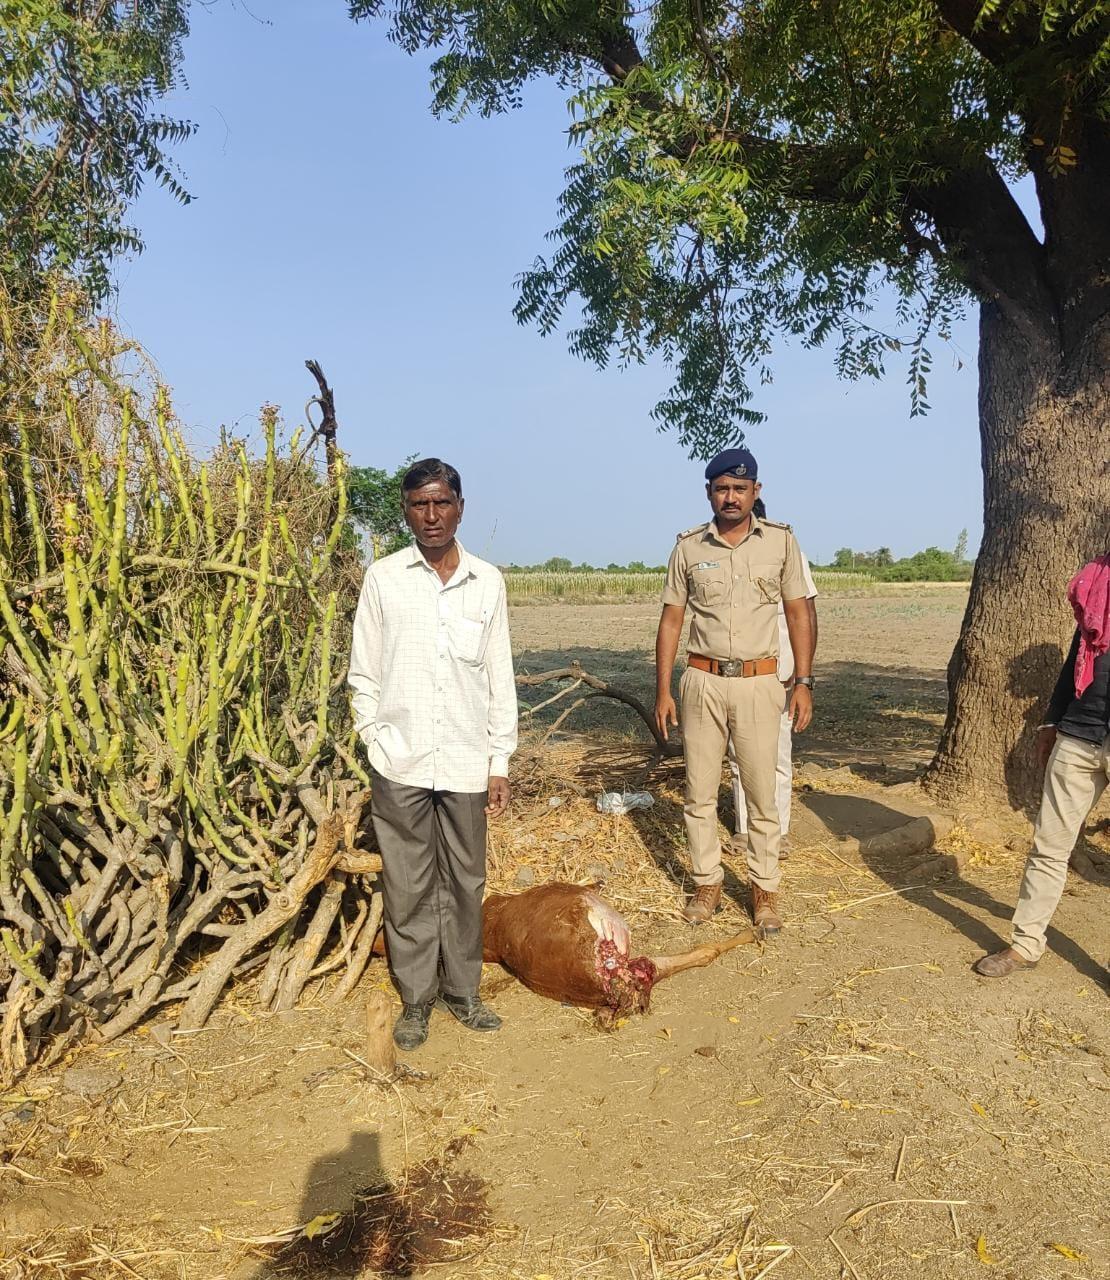 A leopard mauled a calf in Himmatbhai's paddy field in Karkolia village of Sihore.